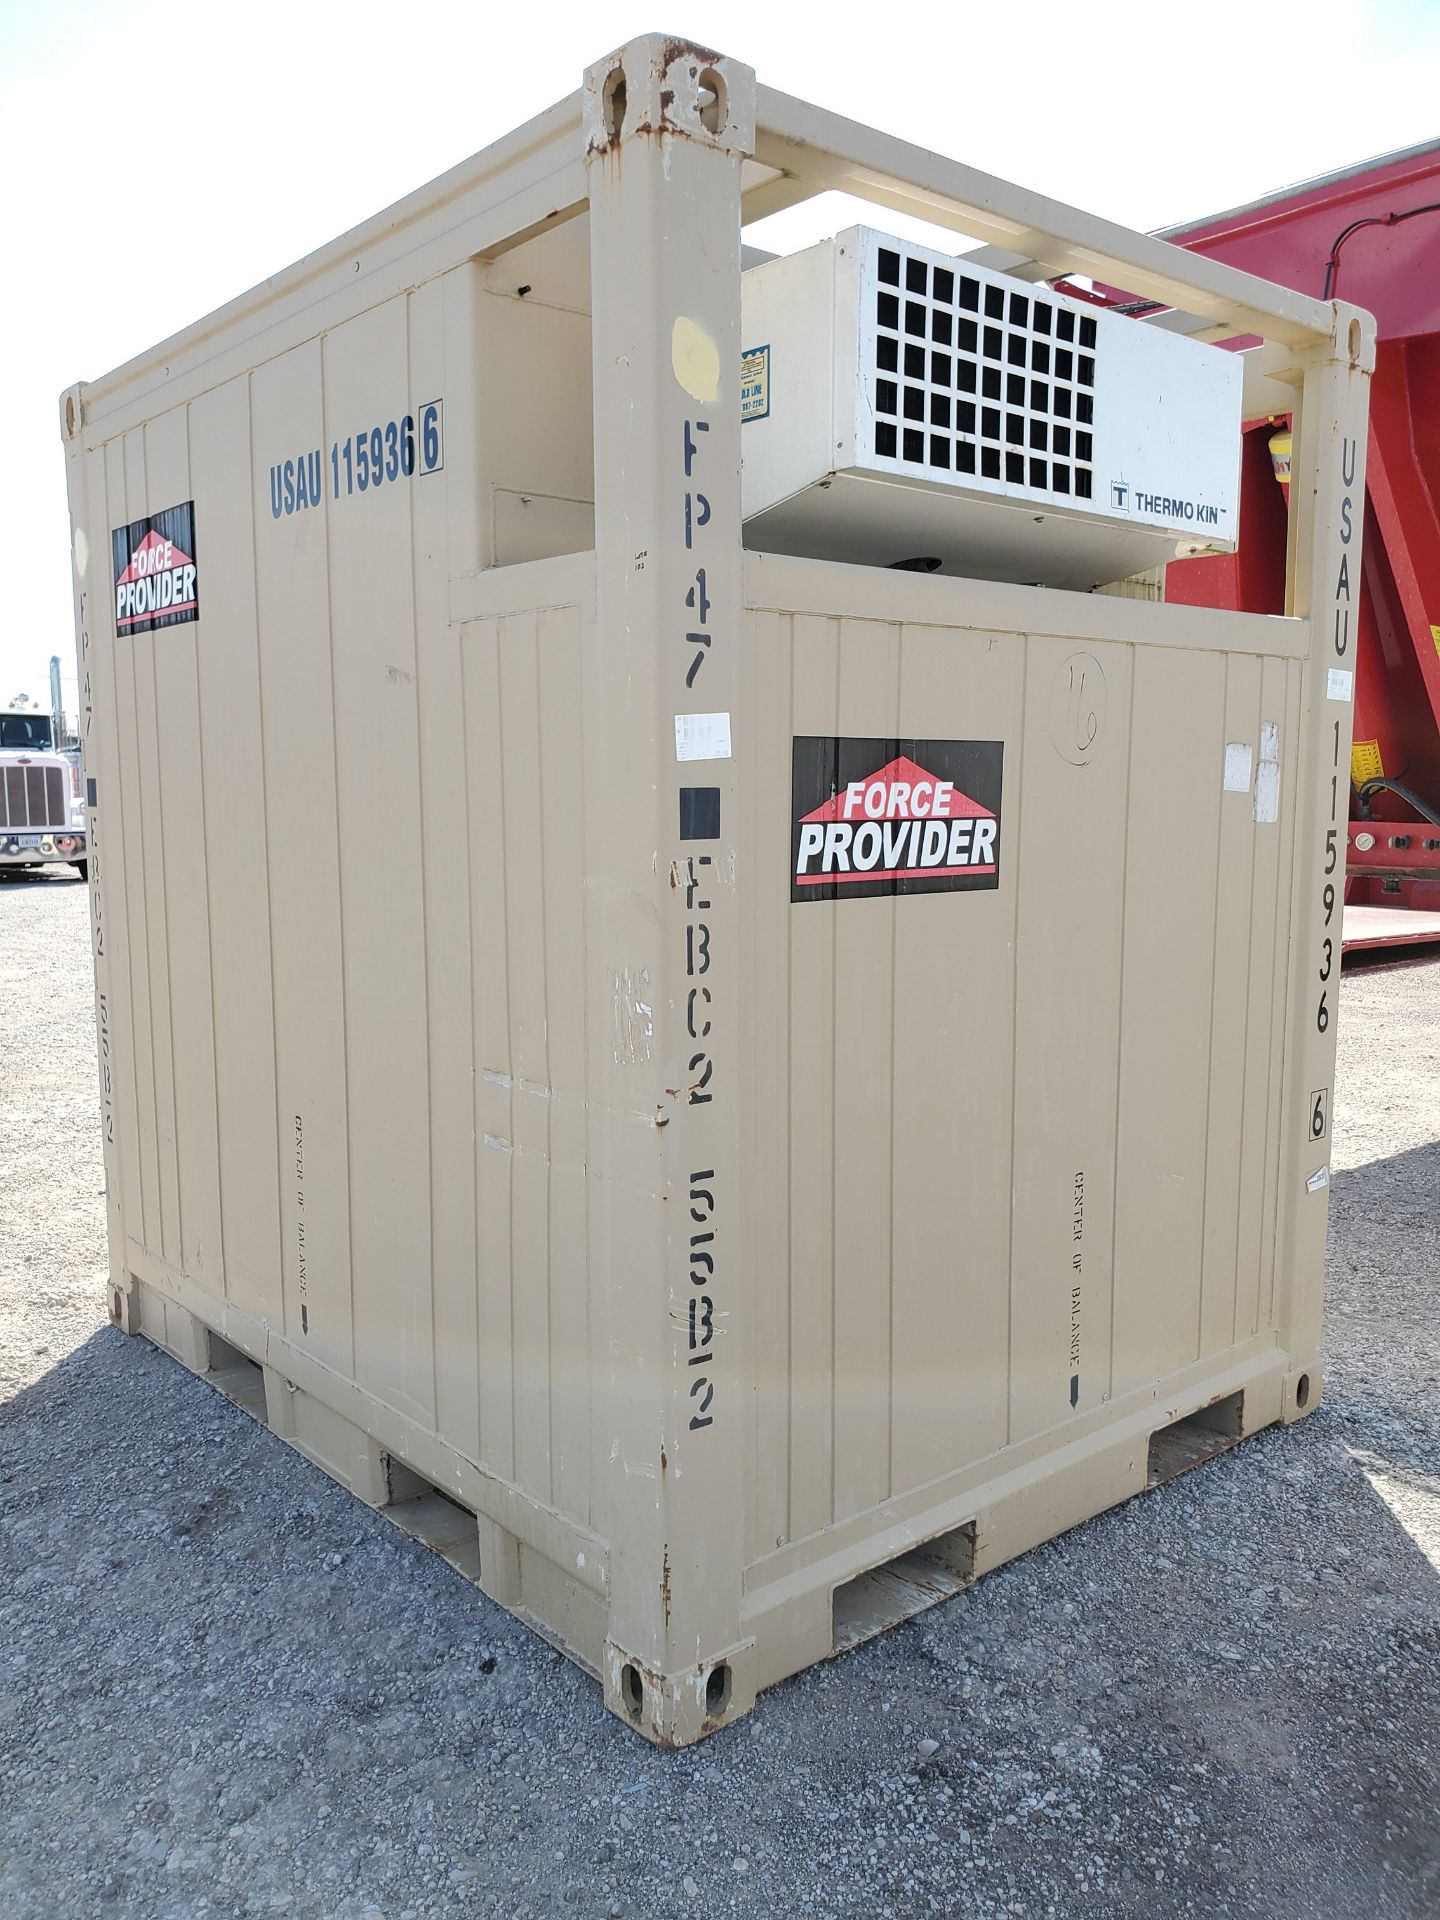 2009 FORCE PROVIDER REFRIGERATED CONTAINER 8' X 8' X 6.5', LESS THAN 200 HOURS - Image 9 of 11